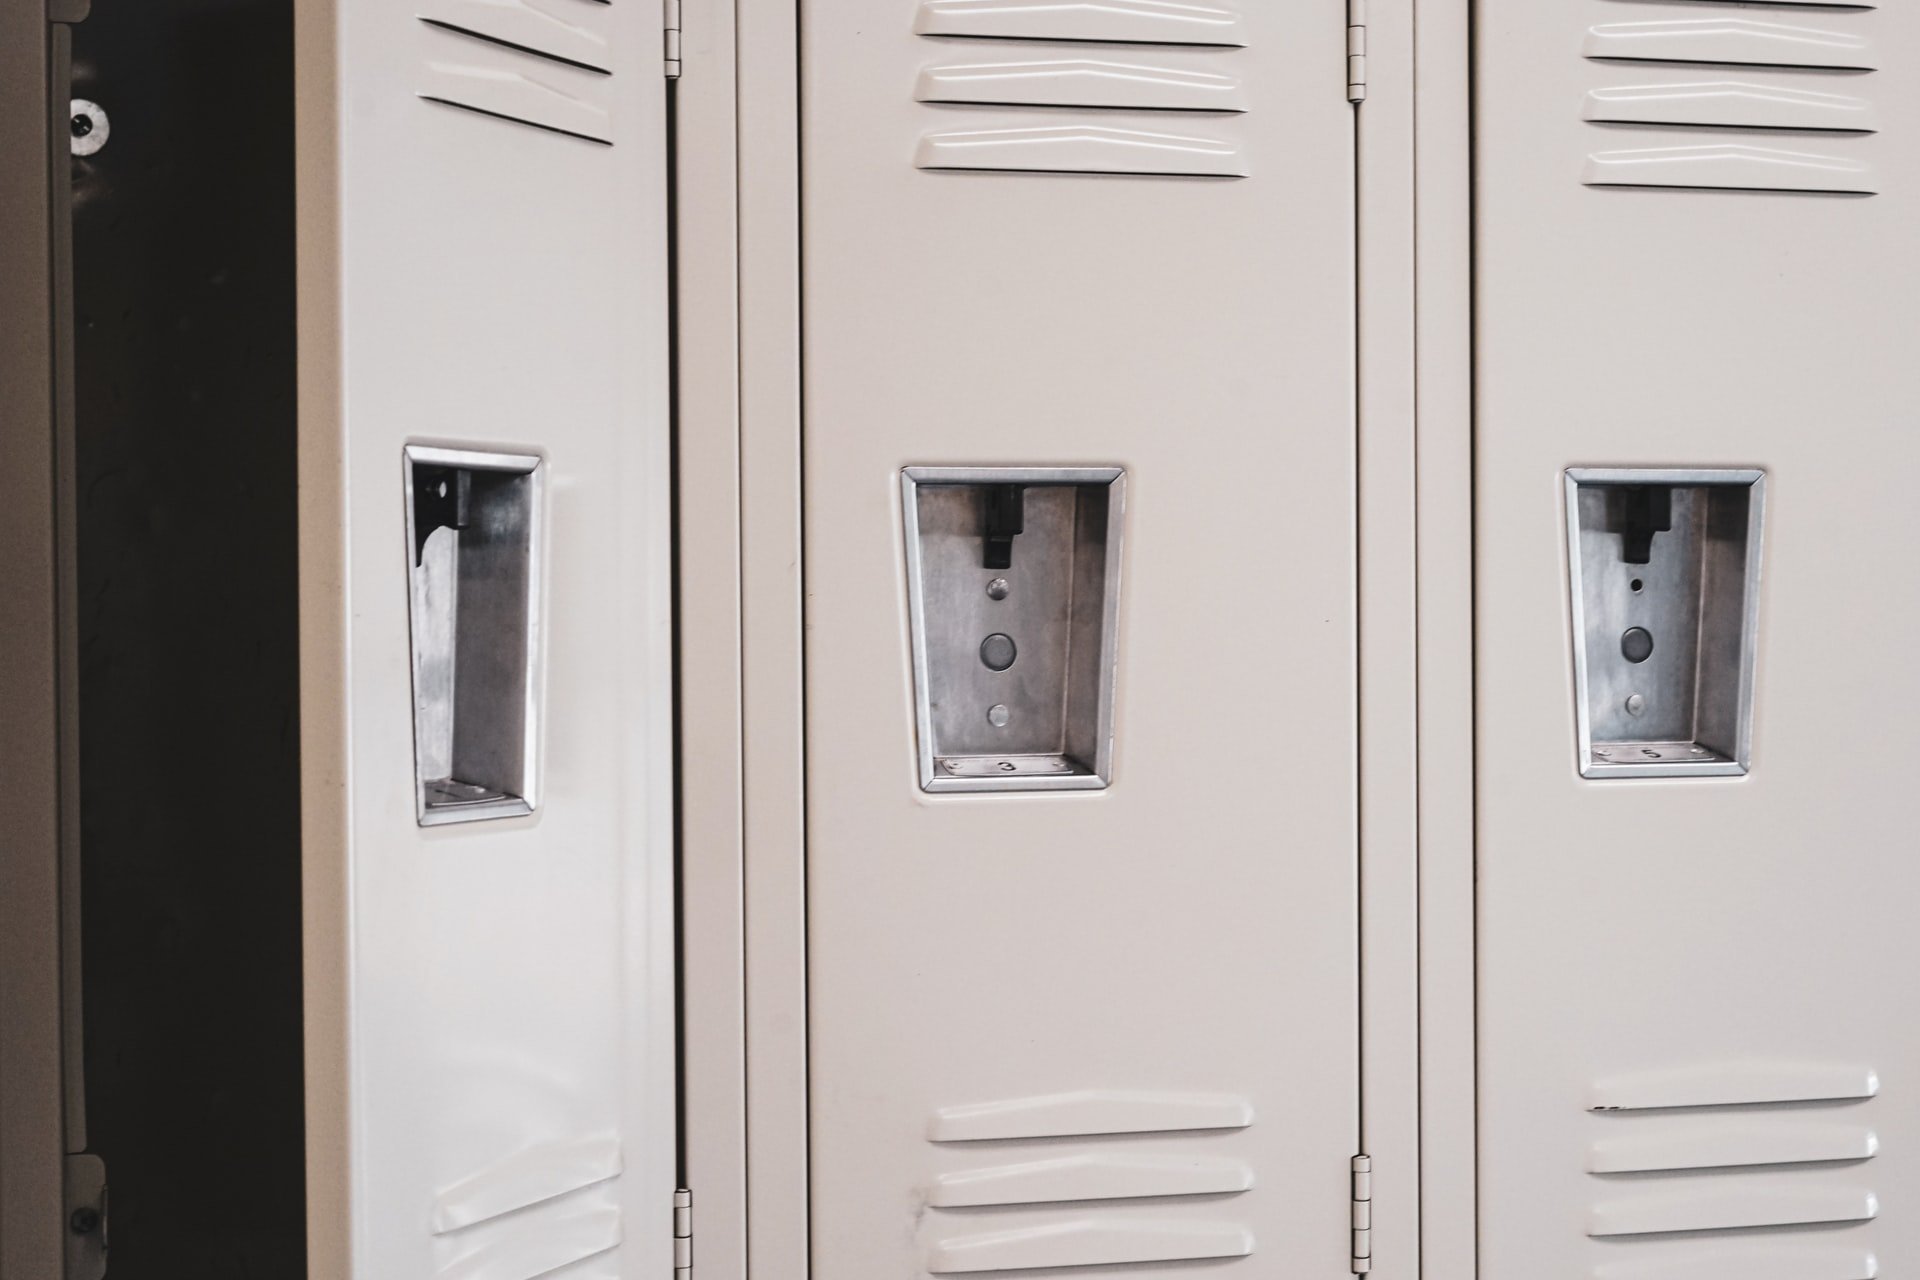 The instructor called him when he was putting his belongings in the locker. | Source: Unsplash